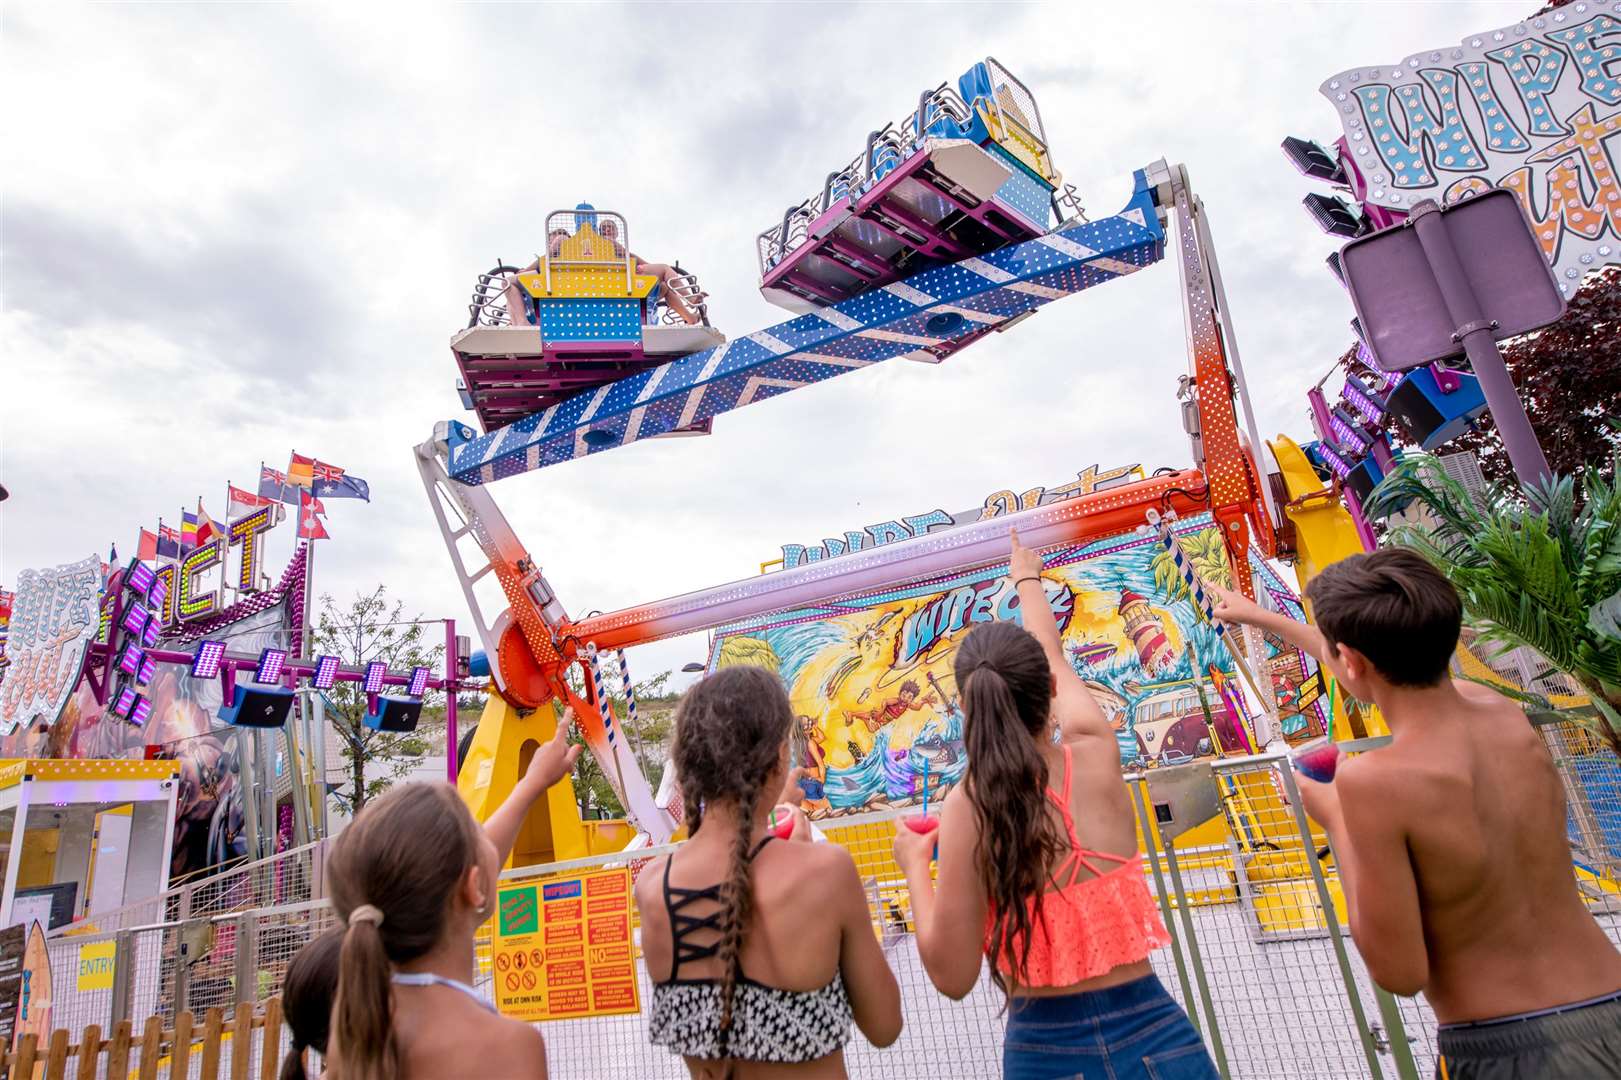 The Beach at Bluewater will have rides and attractions